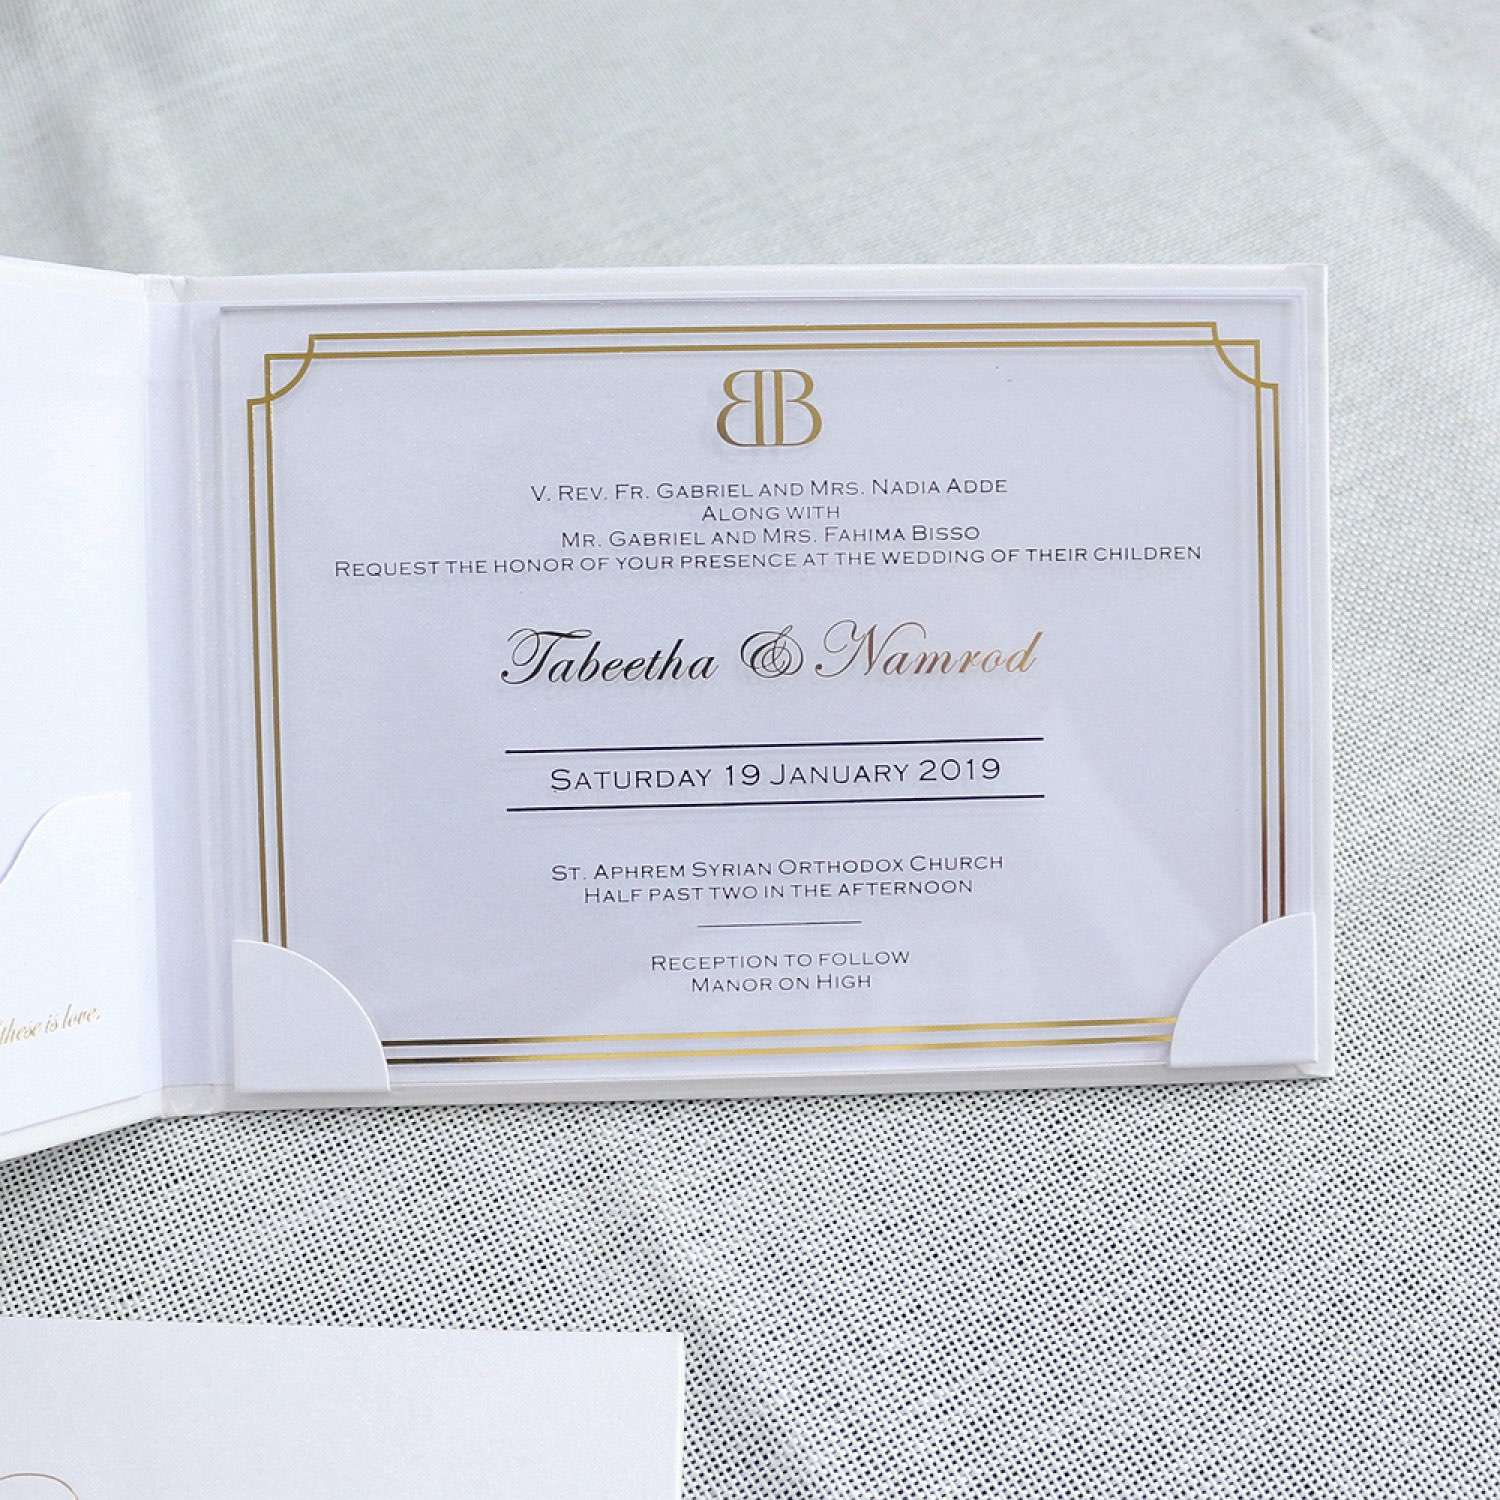 Transparent Acrylic Invitation Card With Hard Cover 2020 Wedding Invitation With Envelope